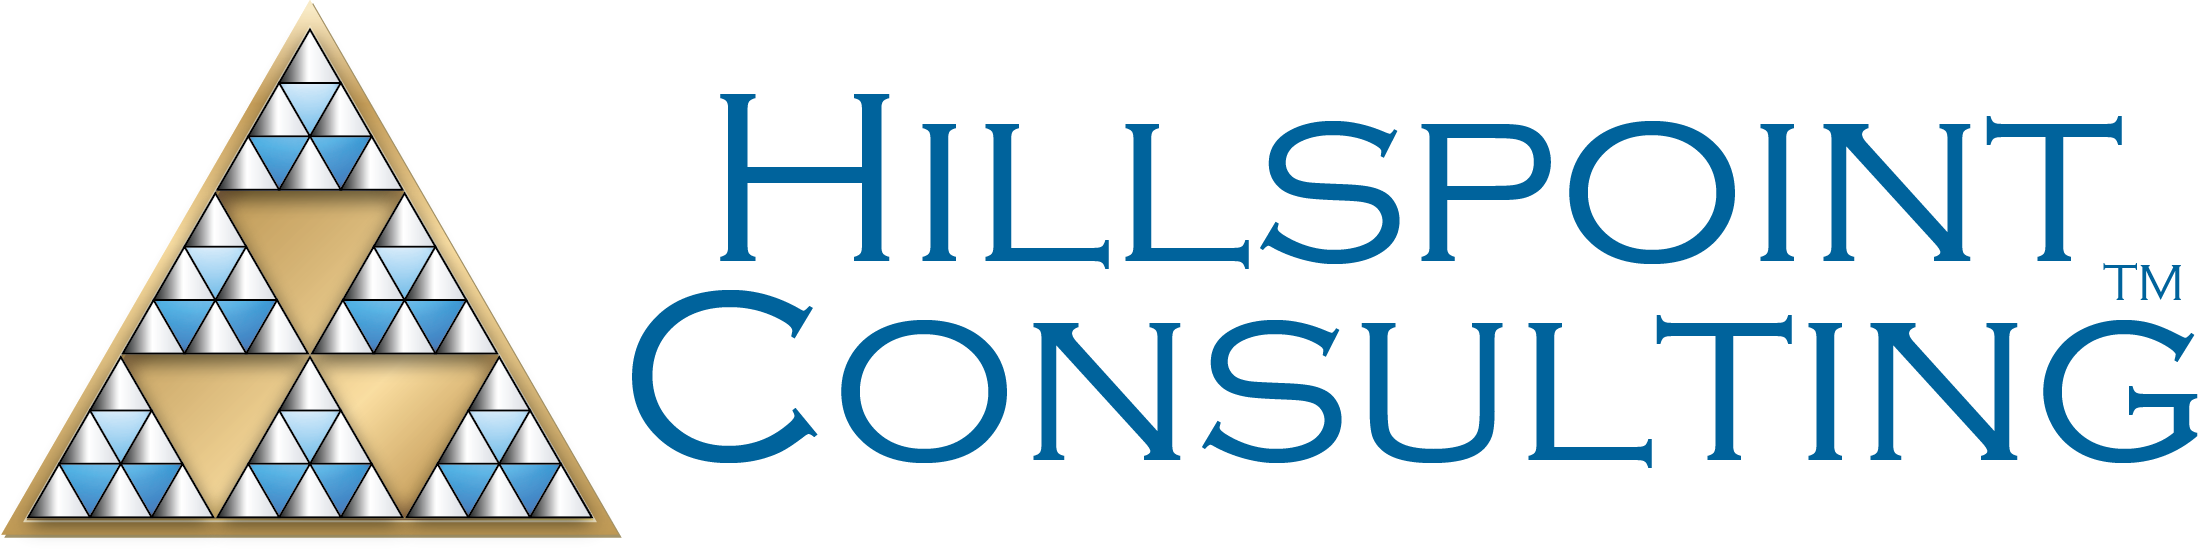 Hillspoint Consulting